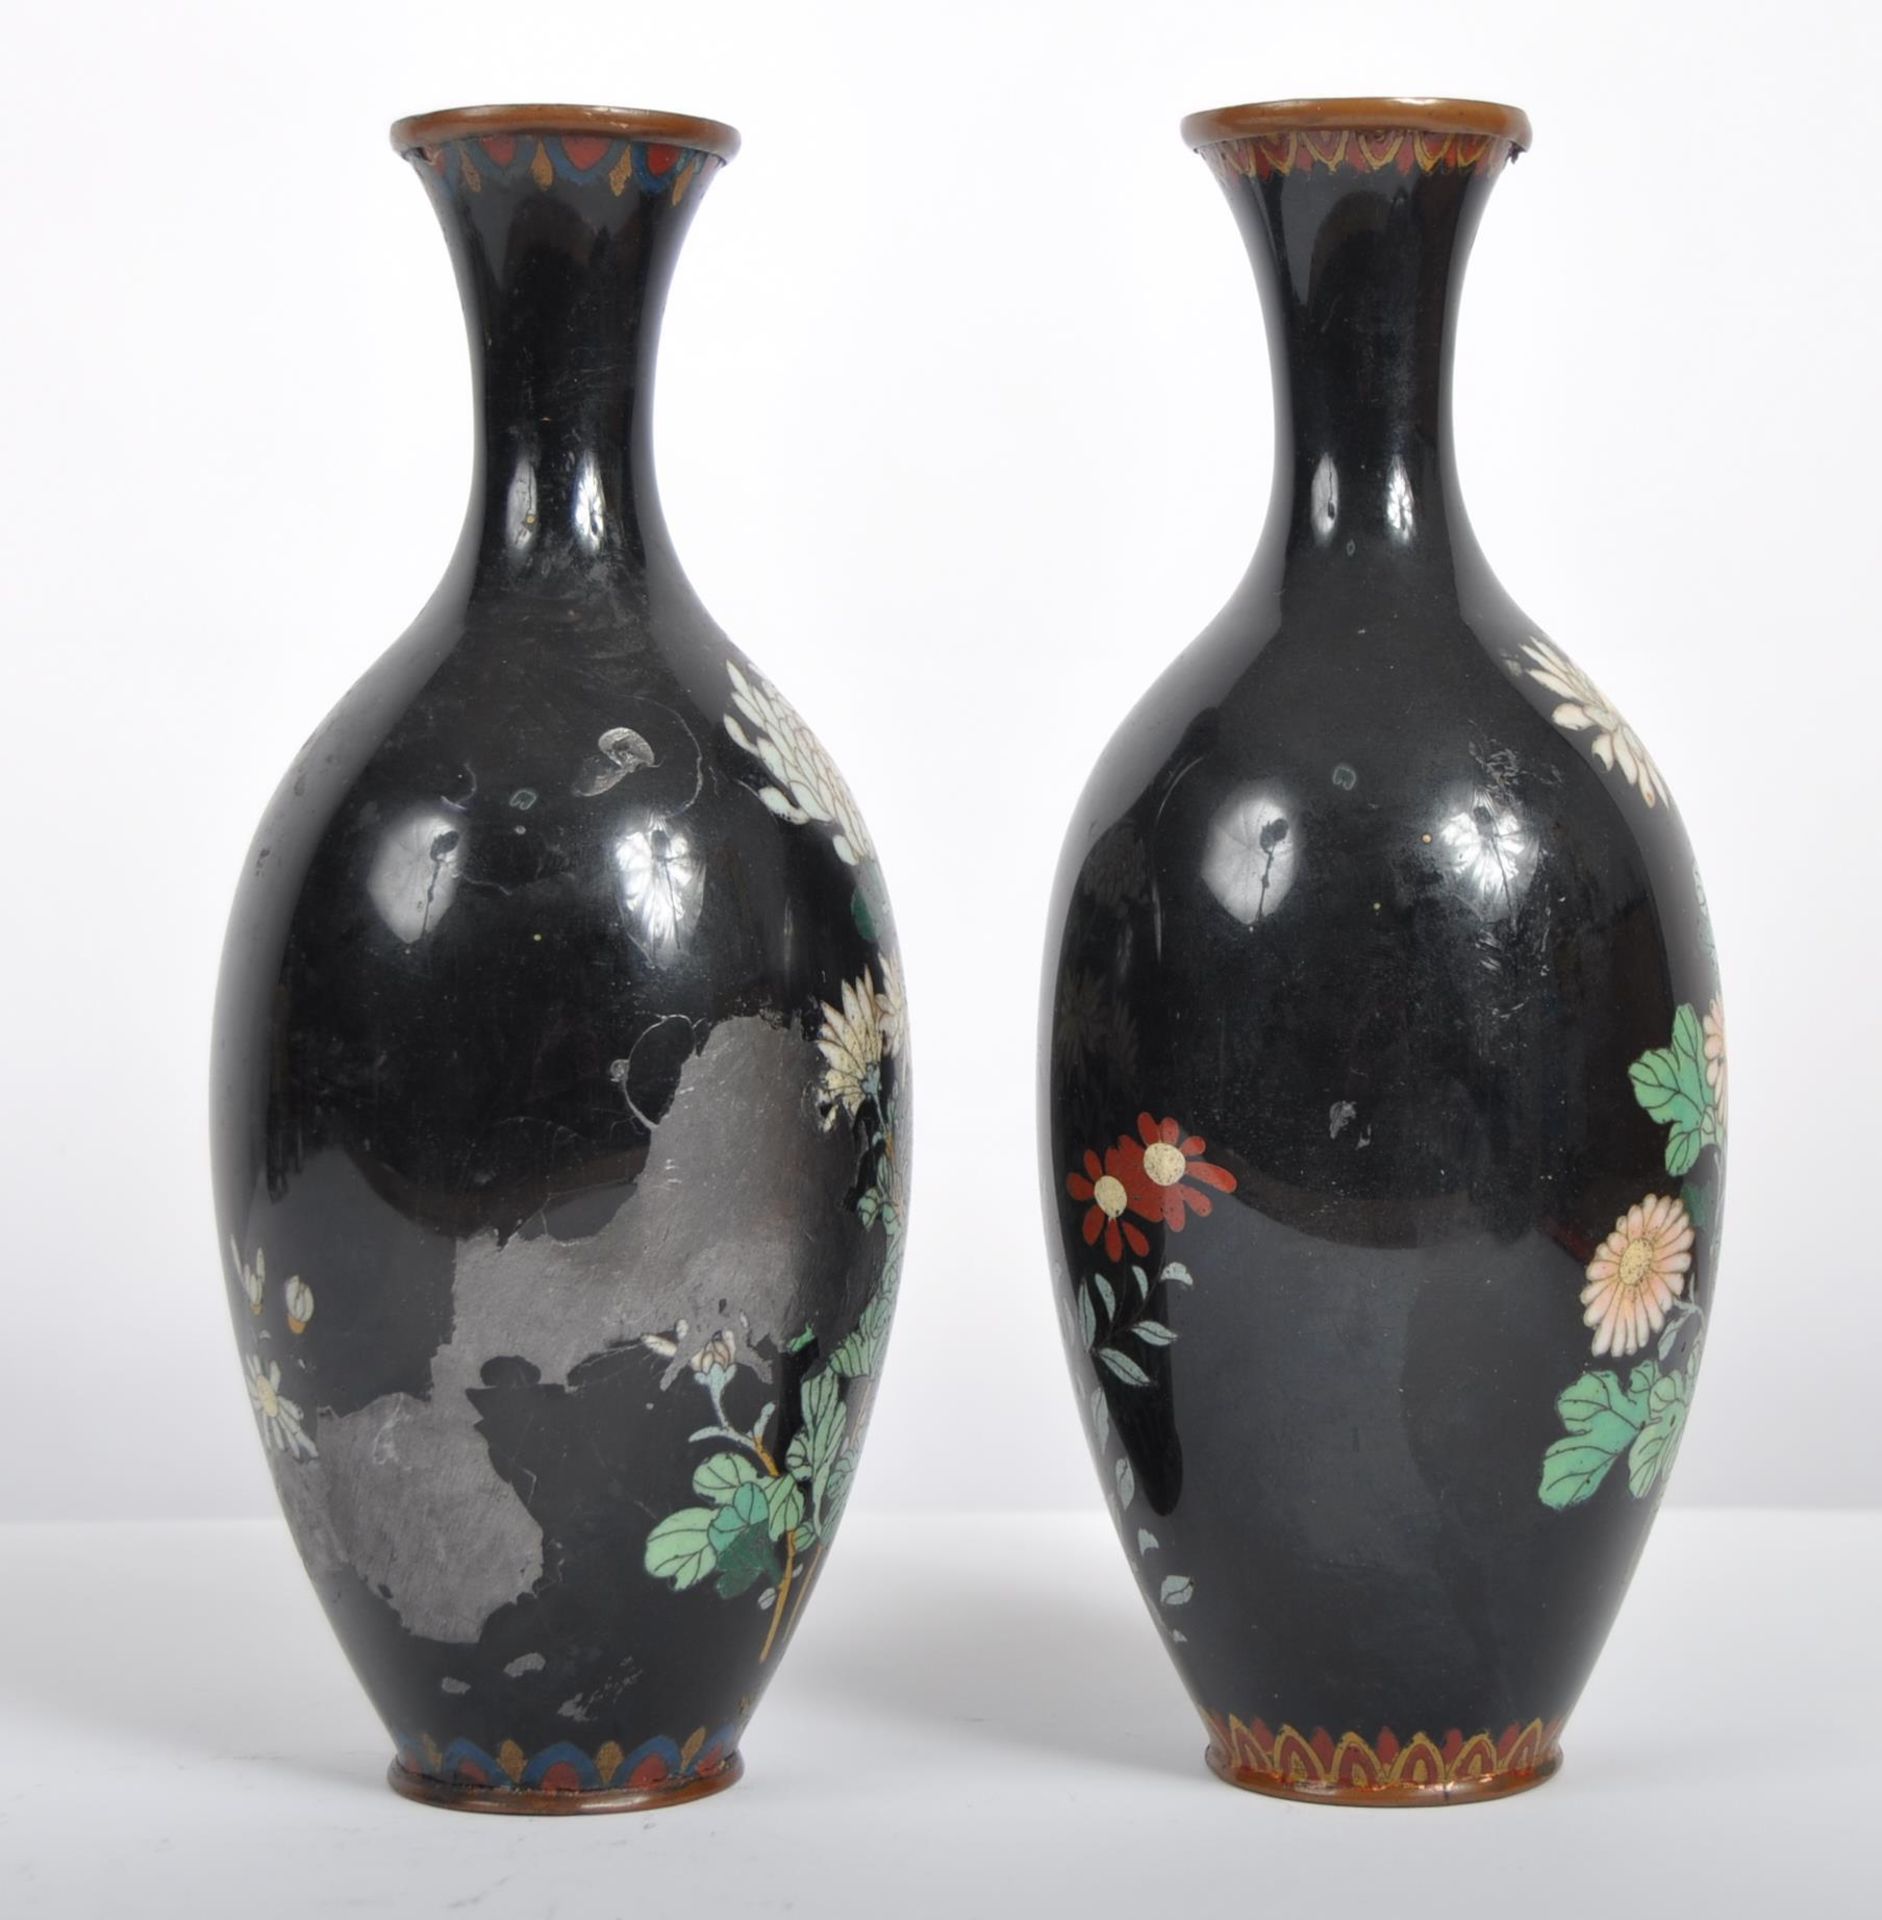 PAIR OF 20TH CENTURY CHINESE CLOISONNE VASES - Image 2 of 6